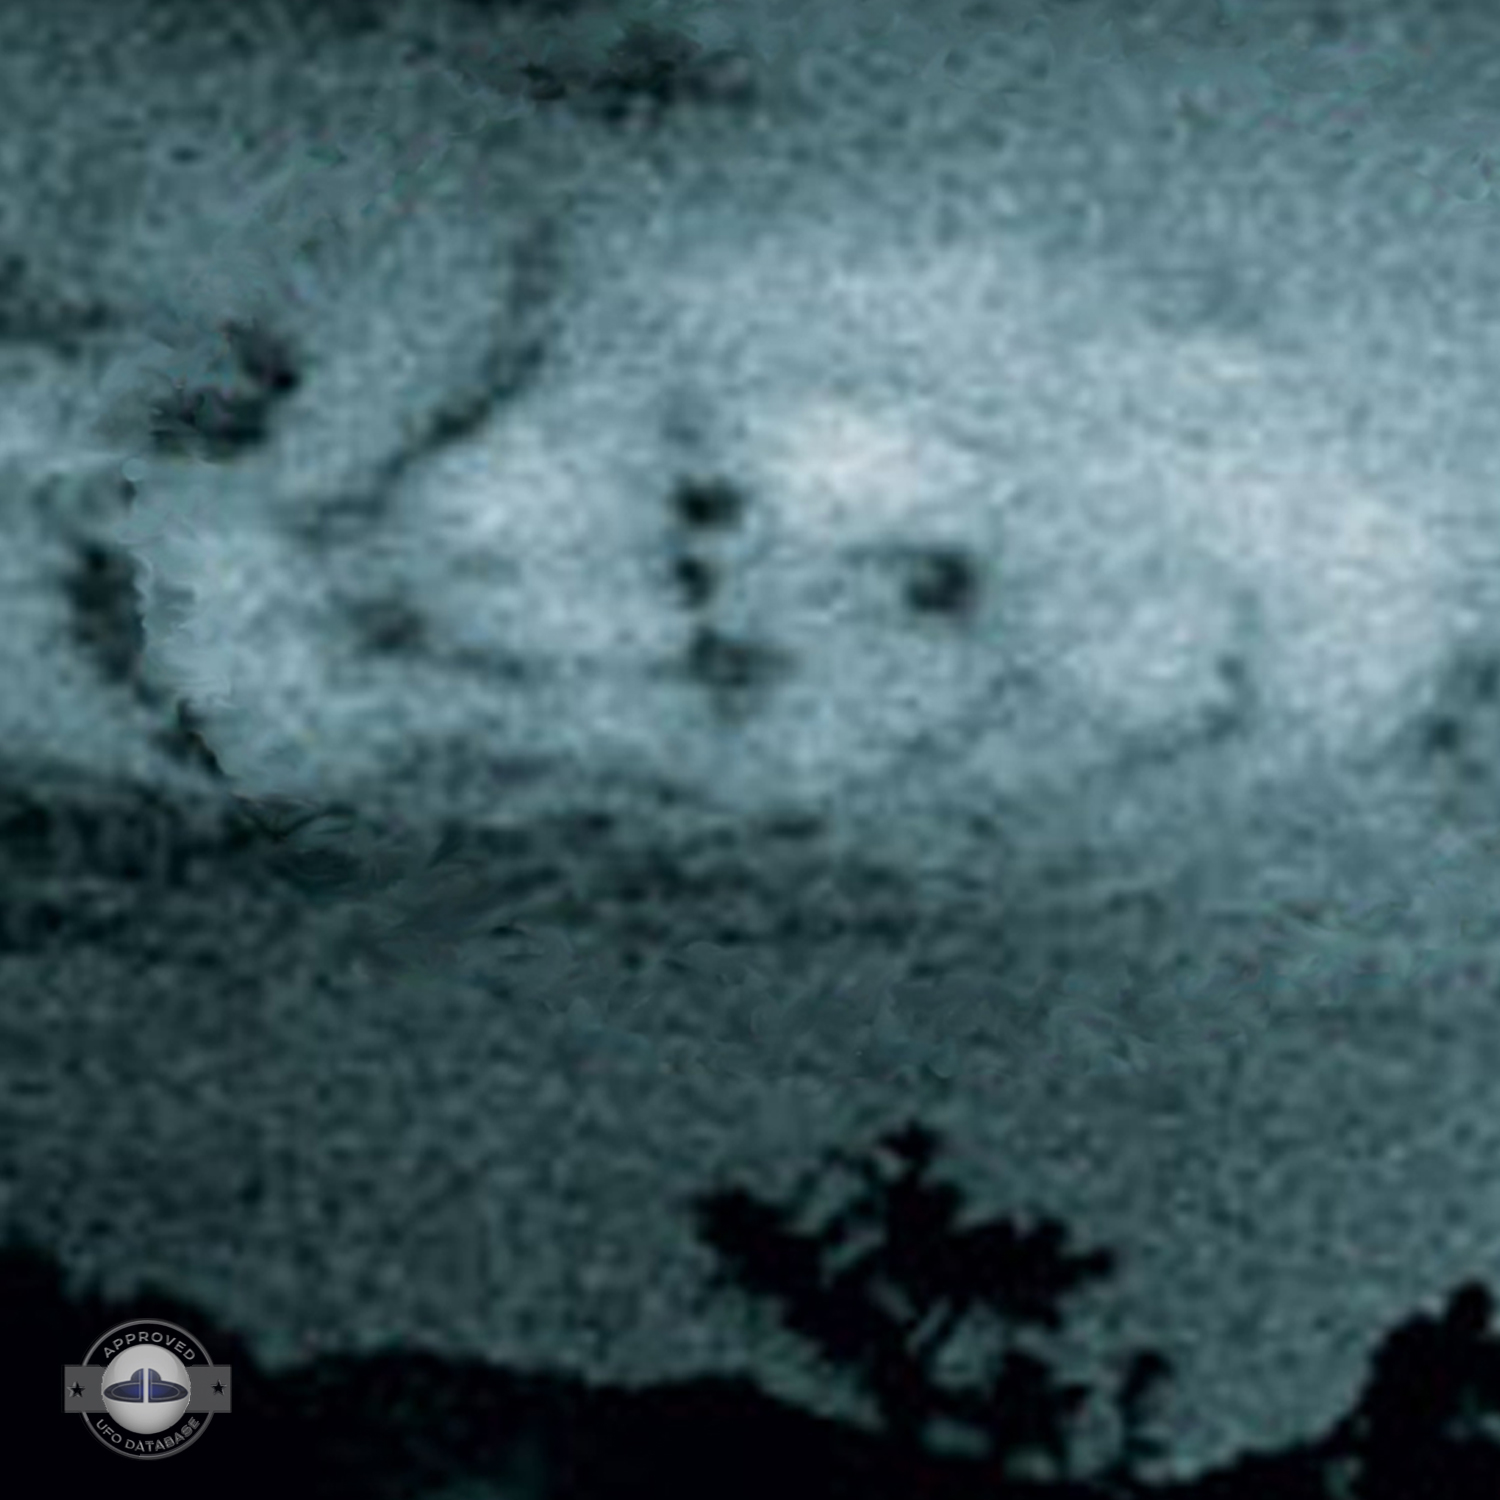 Huge UFO mothership moving in clouds over Guangzhou, Guangdong, China UFO Picture #176-4